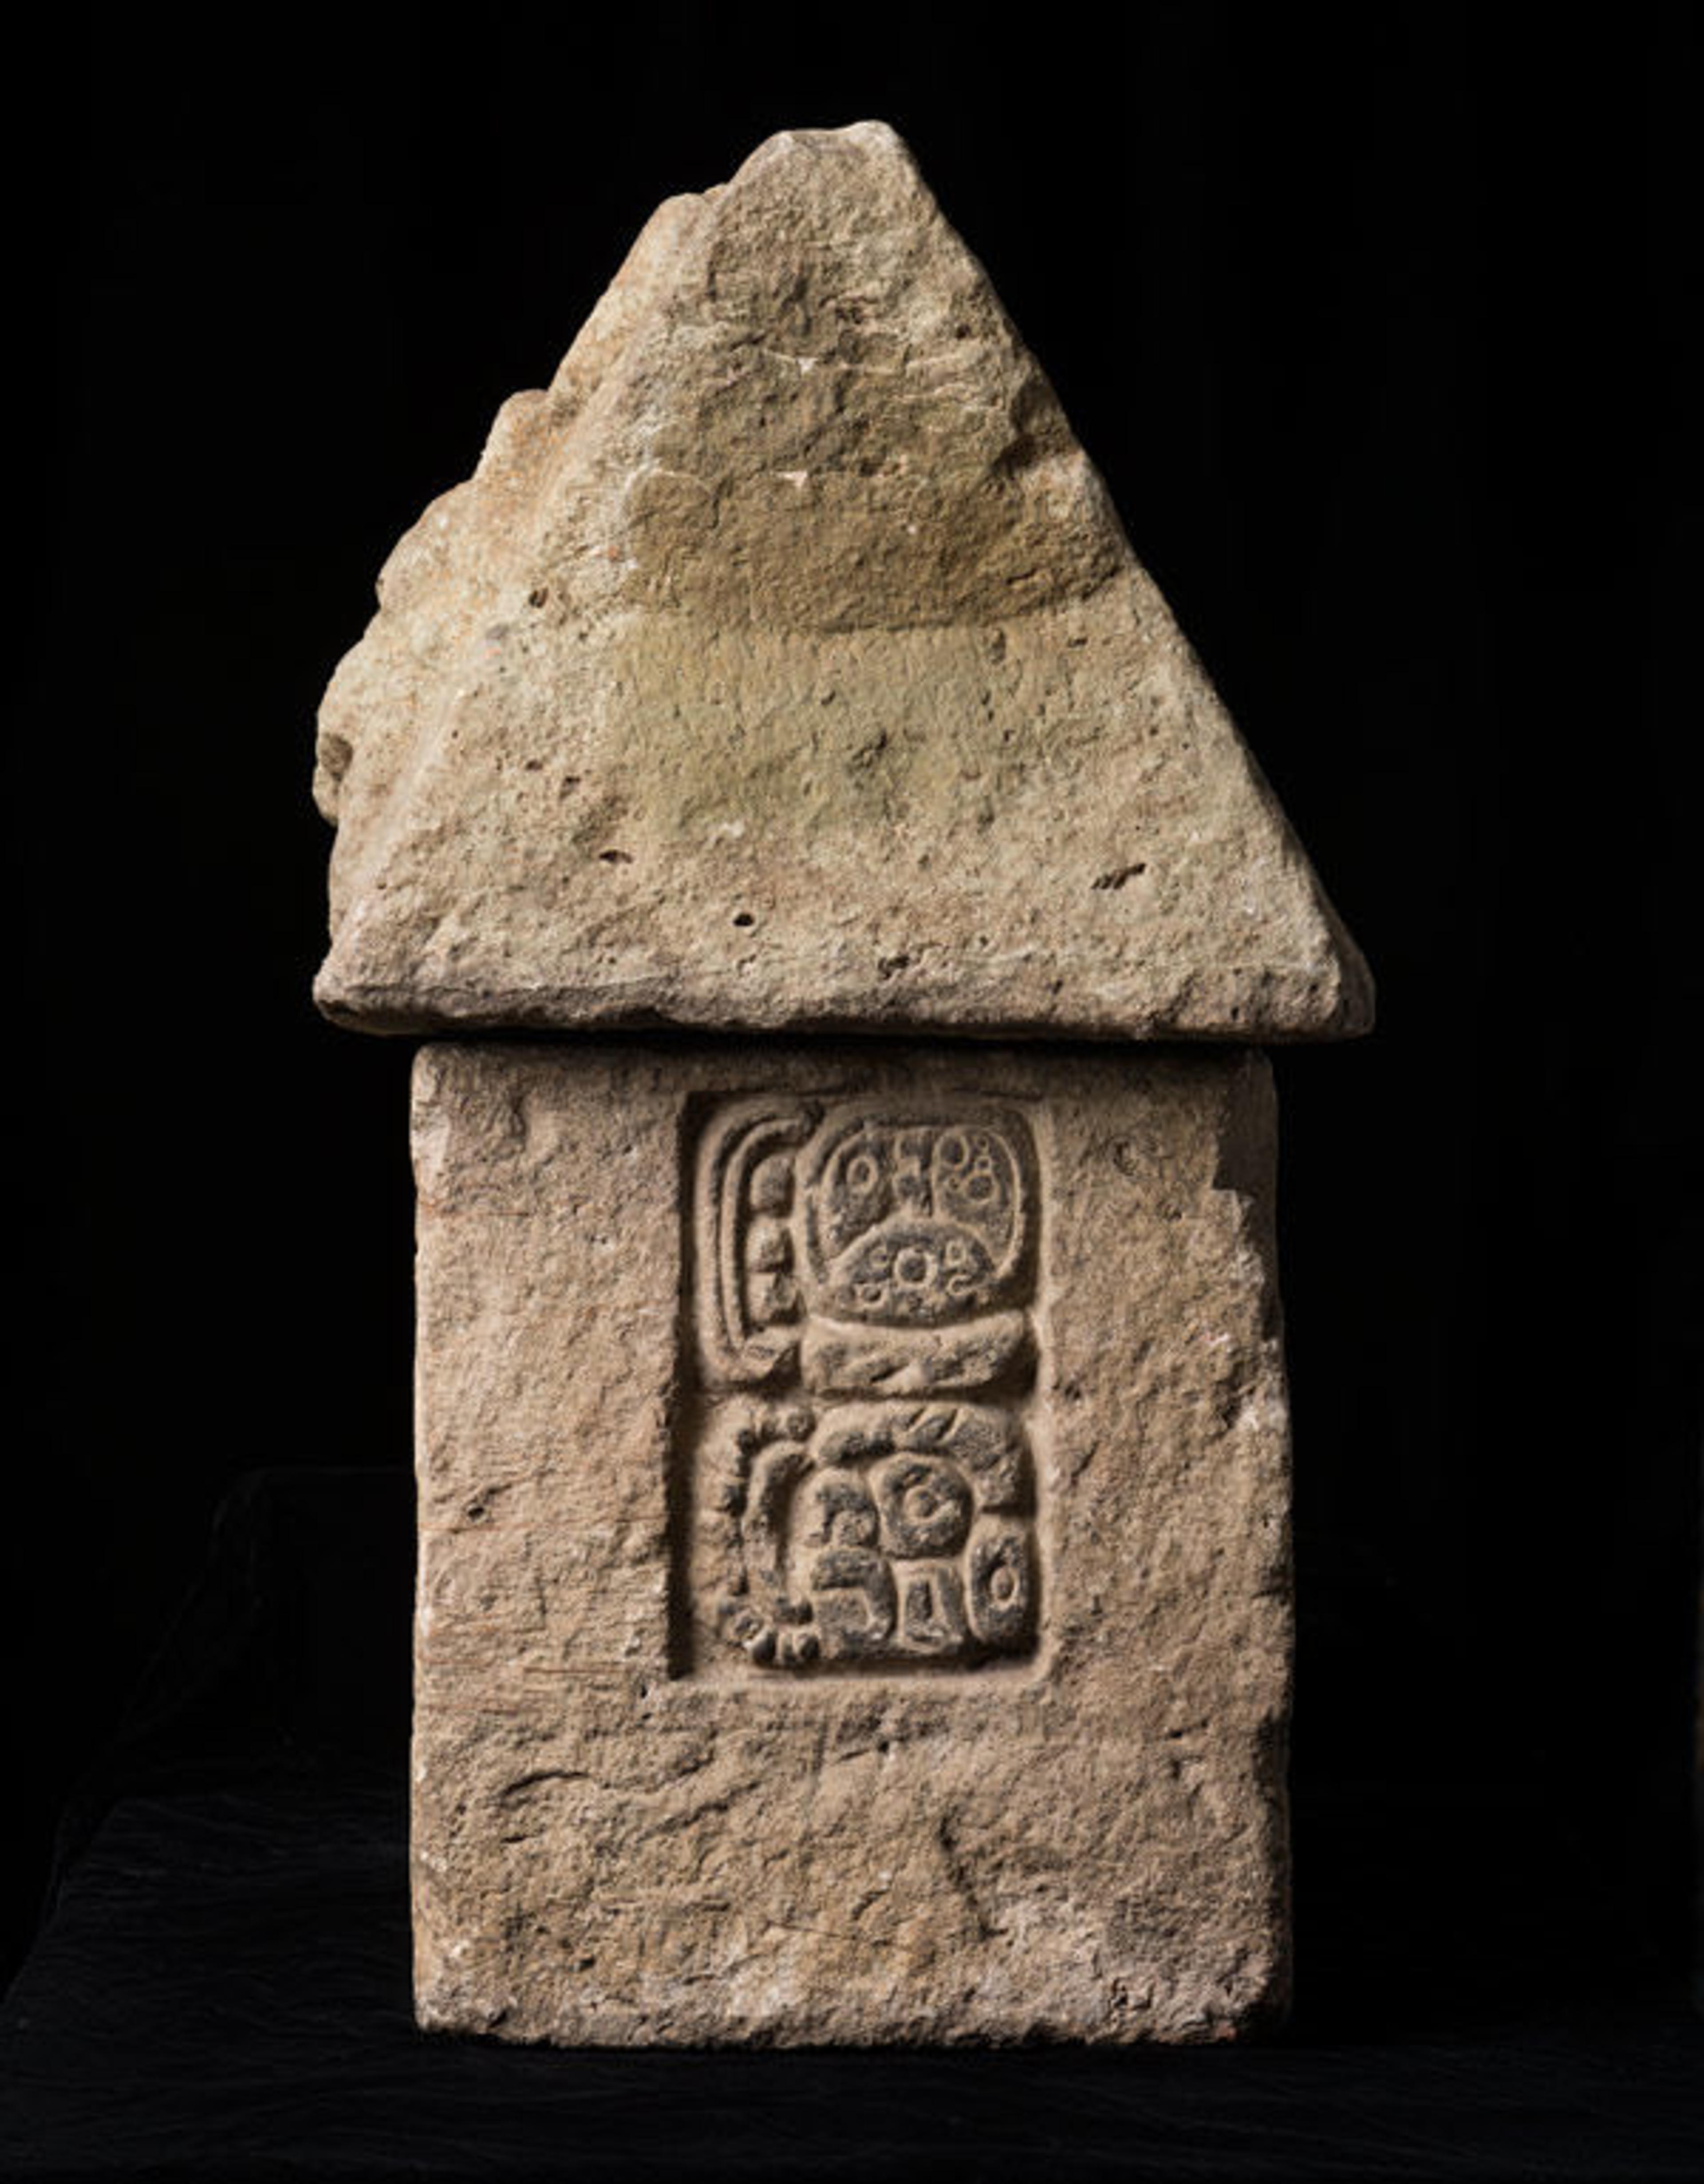 House form, A.D. 550–900. Honduras, Copan. Maya. Stone (Rhyolite); Height: 15 3/4 in. (40 cm), Width: 14 9/16 in. (37 cm). Peabody Museum of Archaeology and Ethnology, Harvard University, Cambridge (92-49-20/C20, C21)